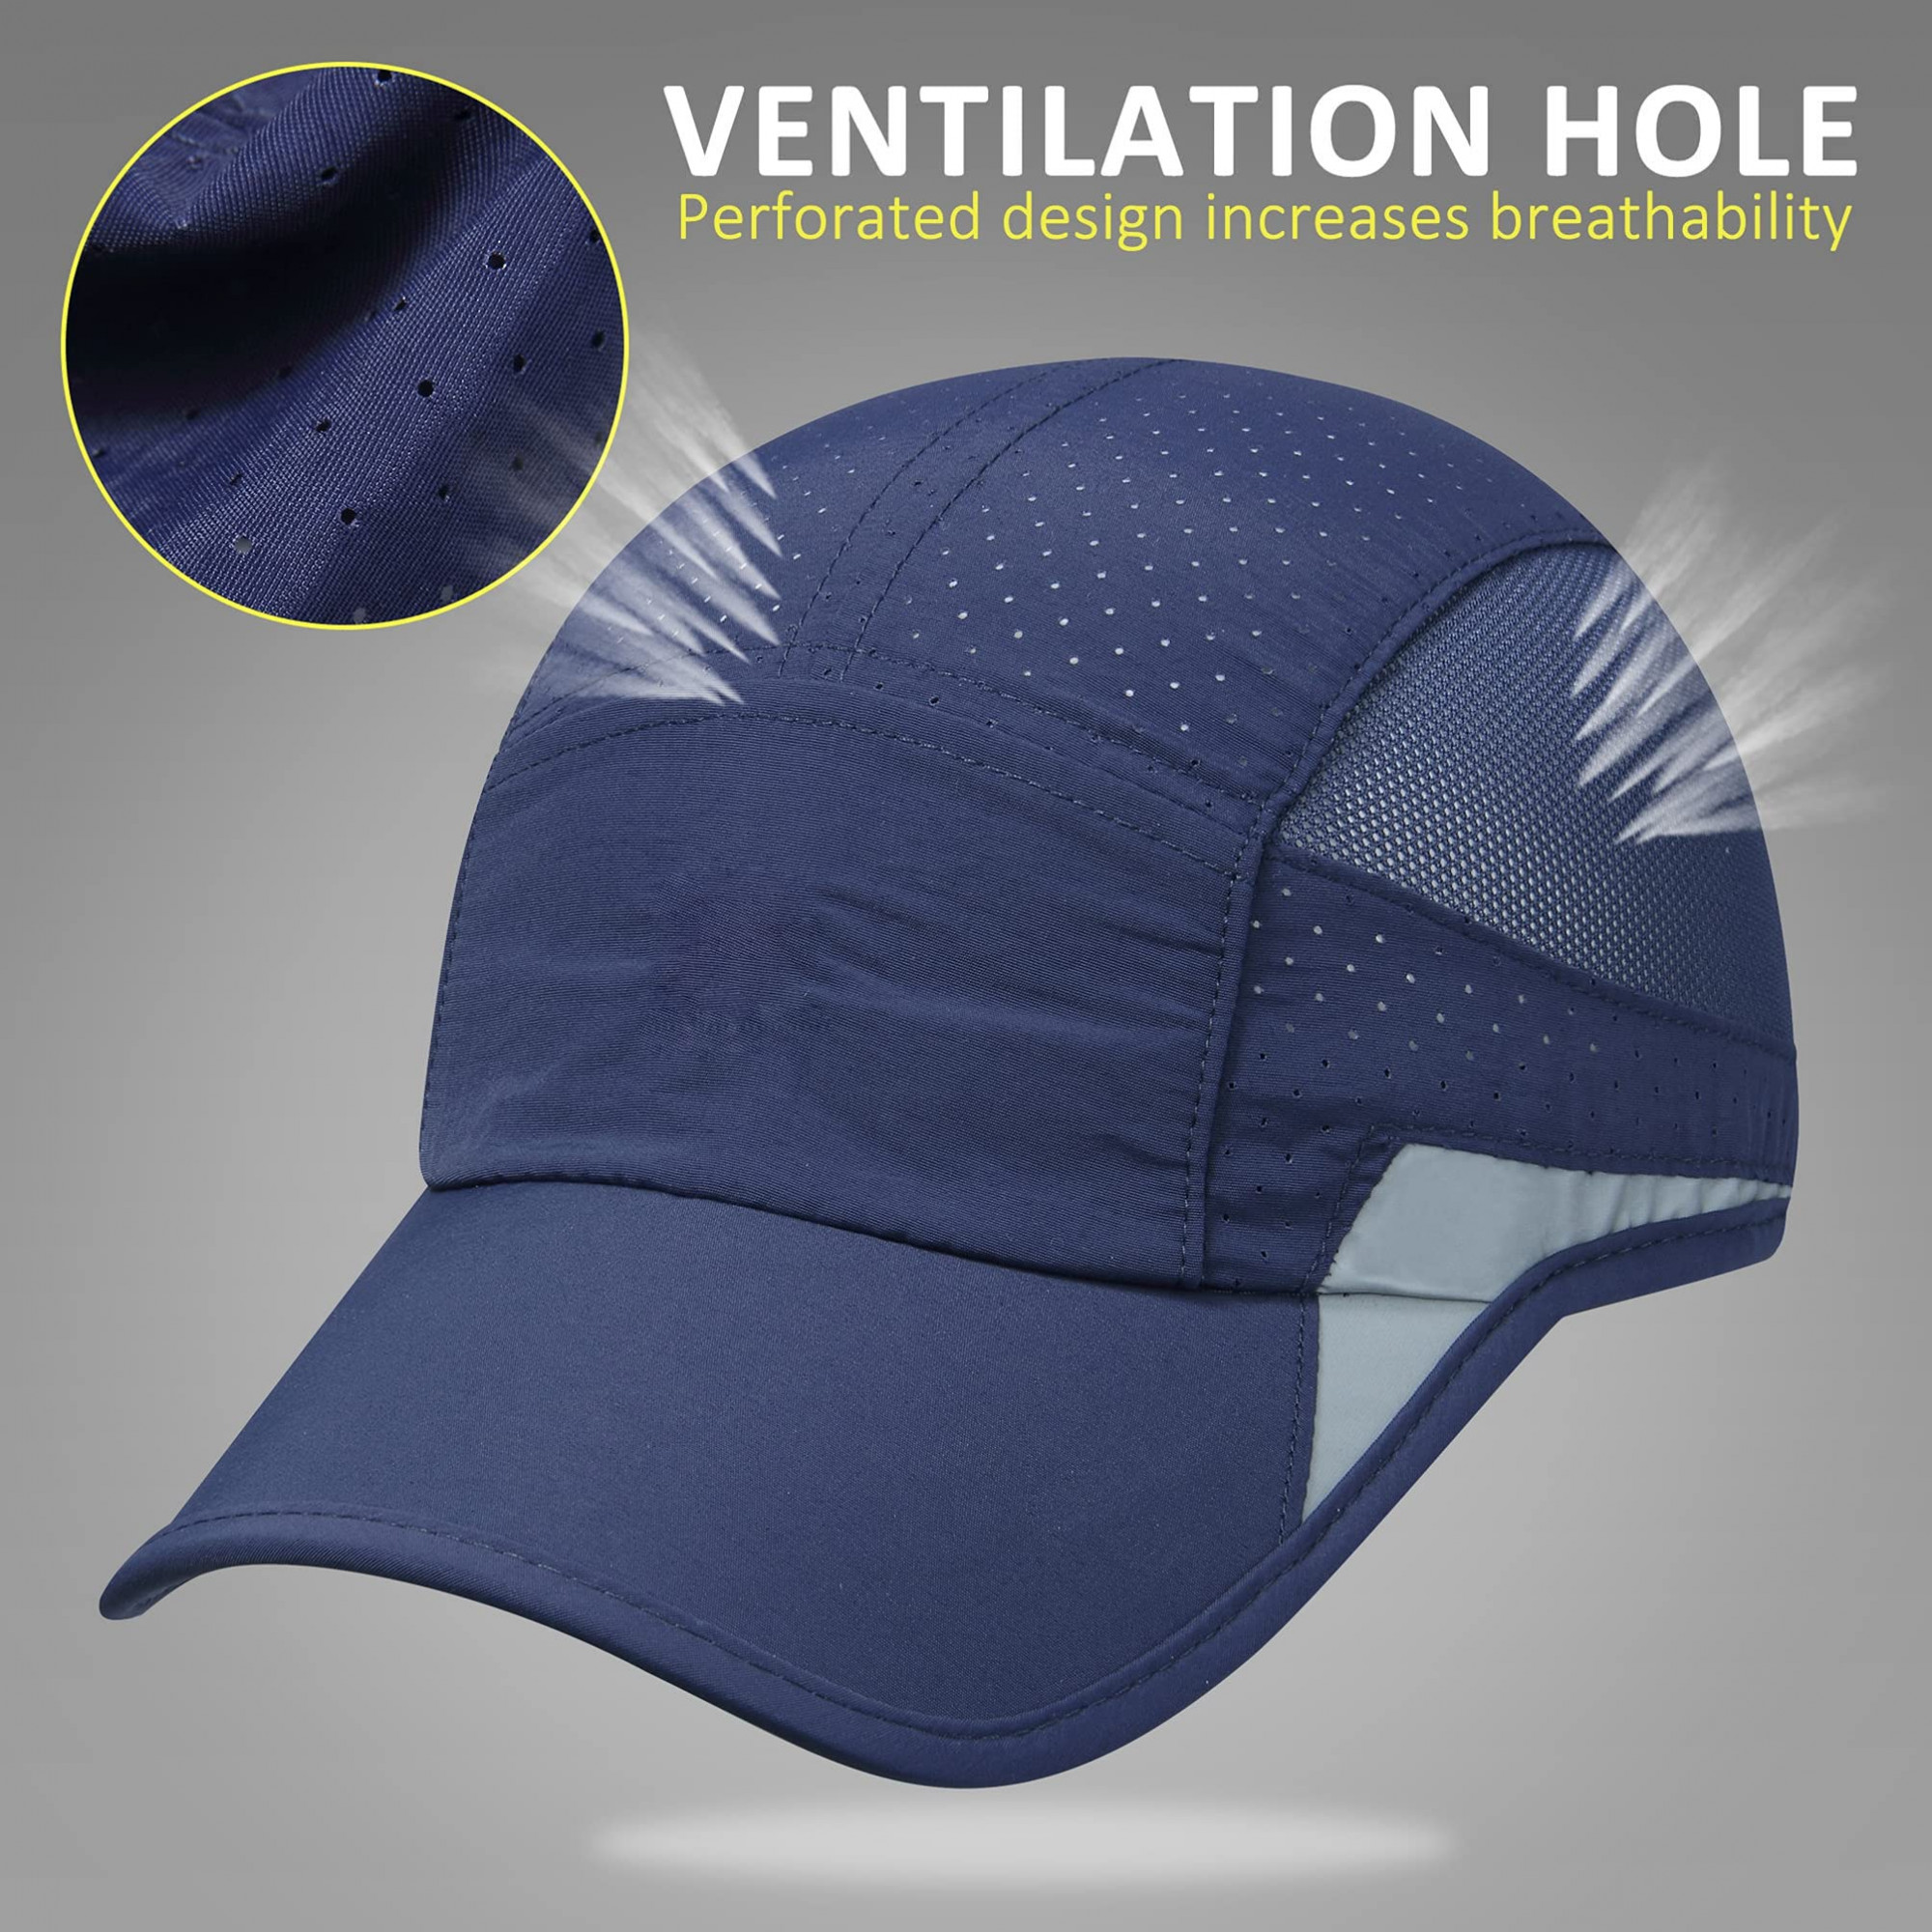 https://www.fastemi.com/uploads/fastemicom/products/hsr-unstructured-reflective-lightweight-breathable-stylish-sports-soft-hat-cap-for-men-and-women-navy-bluesize-free-size-274580904092039_l.jpg